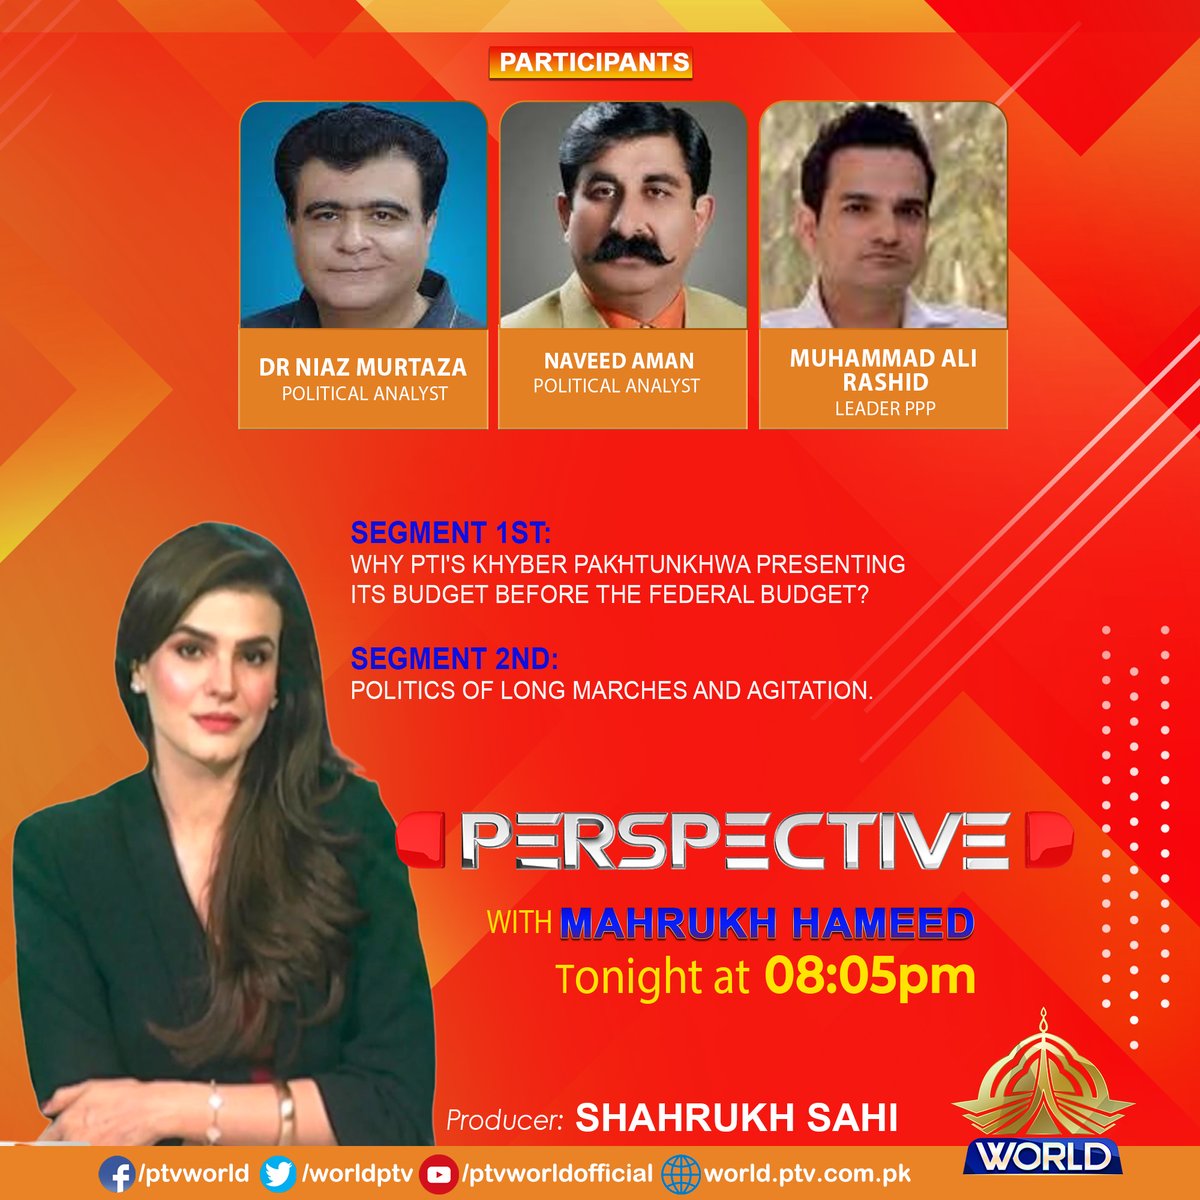 Watch Perspective tonight at 08:05pm. only on PTV WORLD